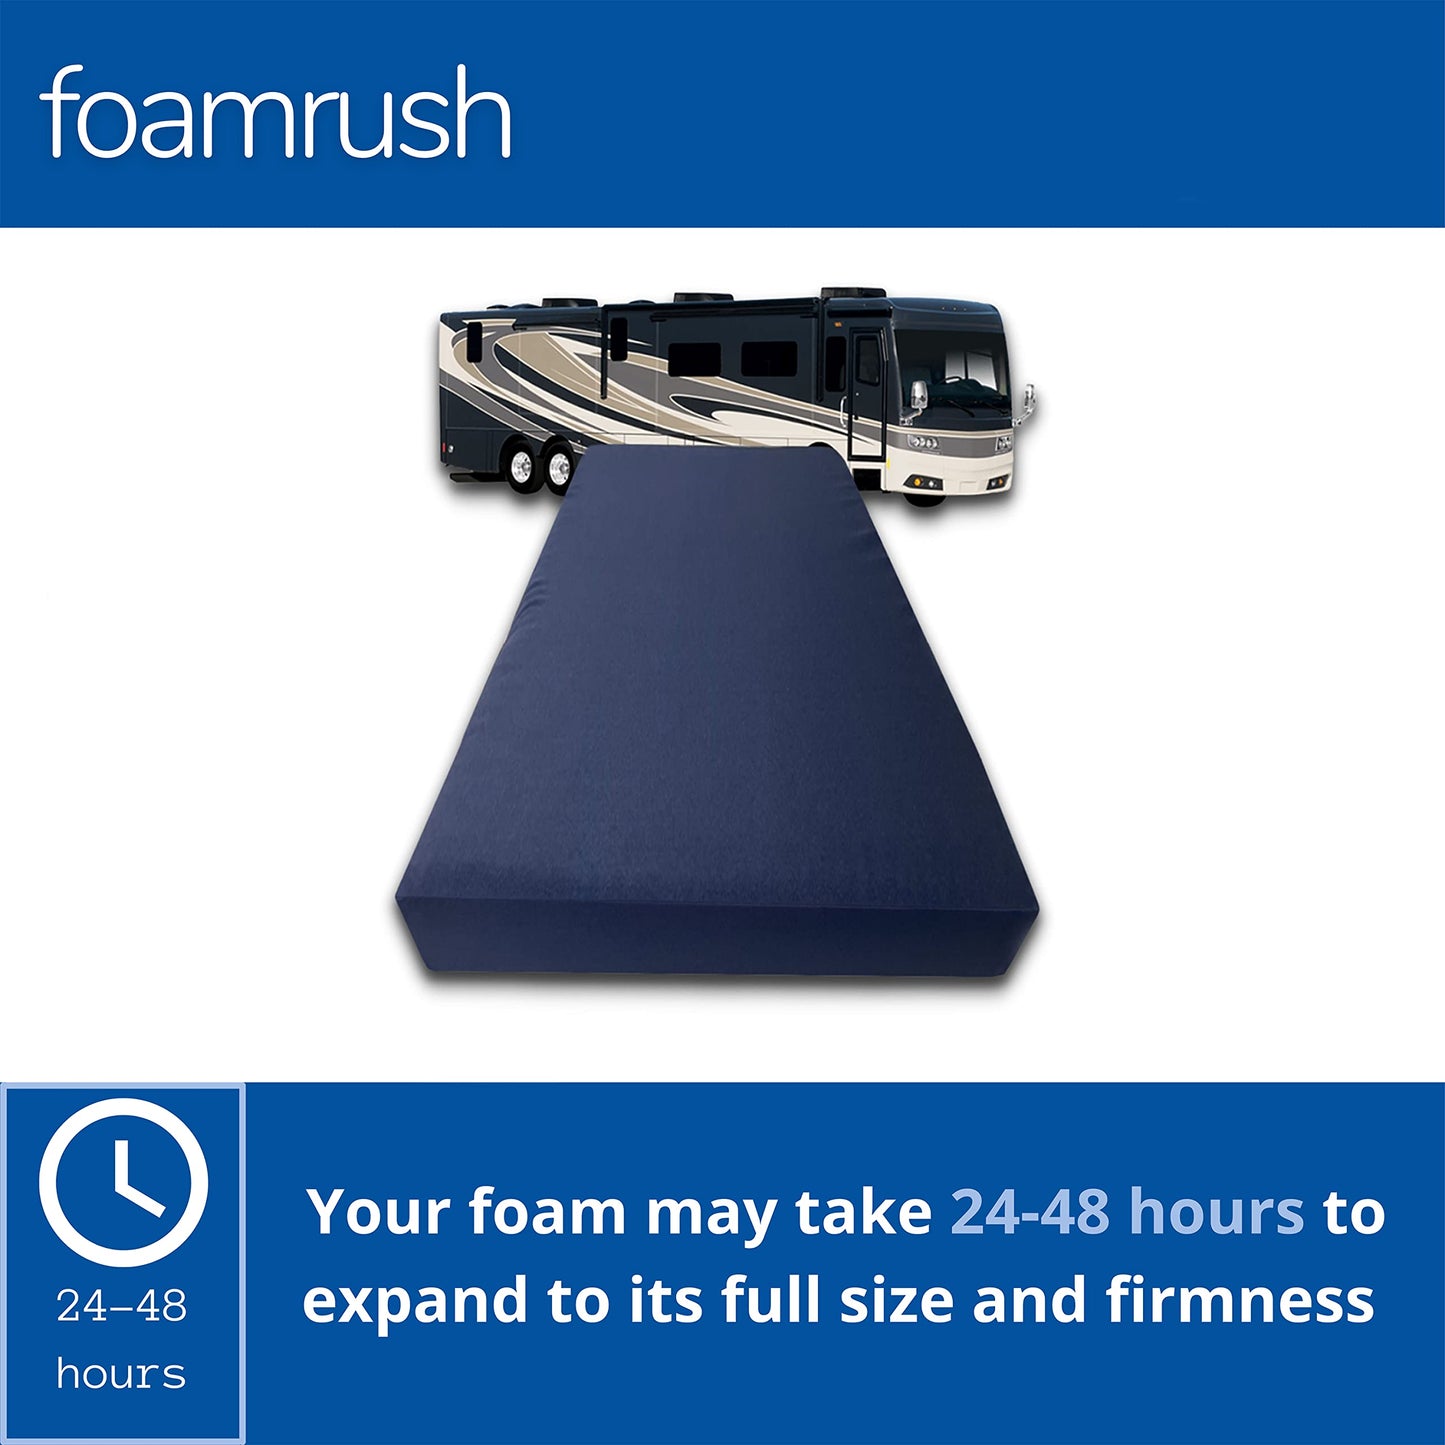 FoamRush 8" Olympic Queen (66" x 80") High Density Foam RV Mattress Replacement W/Canvas Navy Cover, Extra Firm, Made in USA, Camper Trailer Removable Water-Resistant Outdoor/Indoor Cover W/Zipper